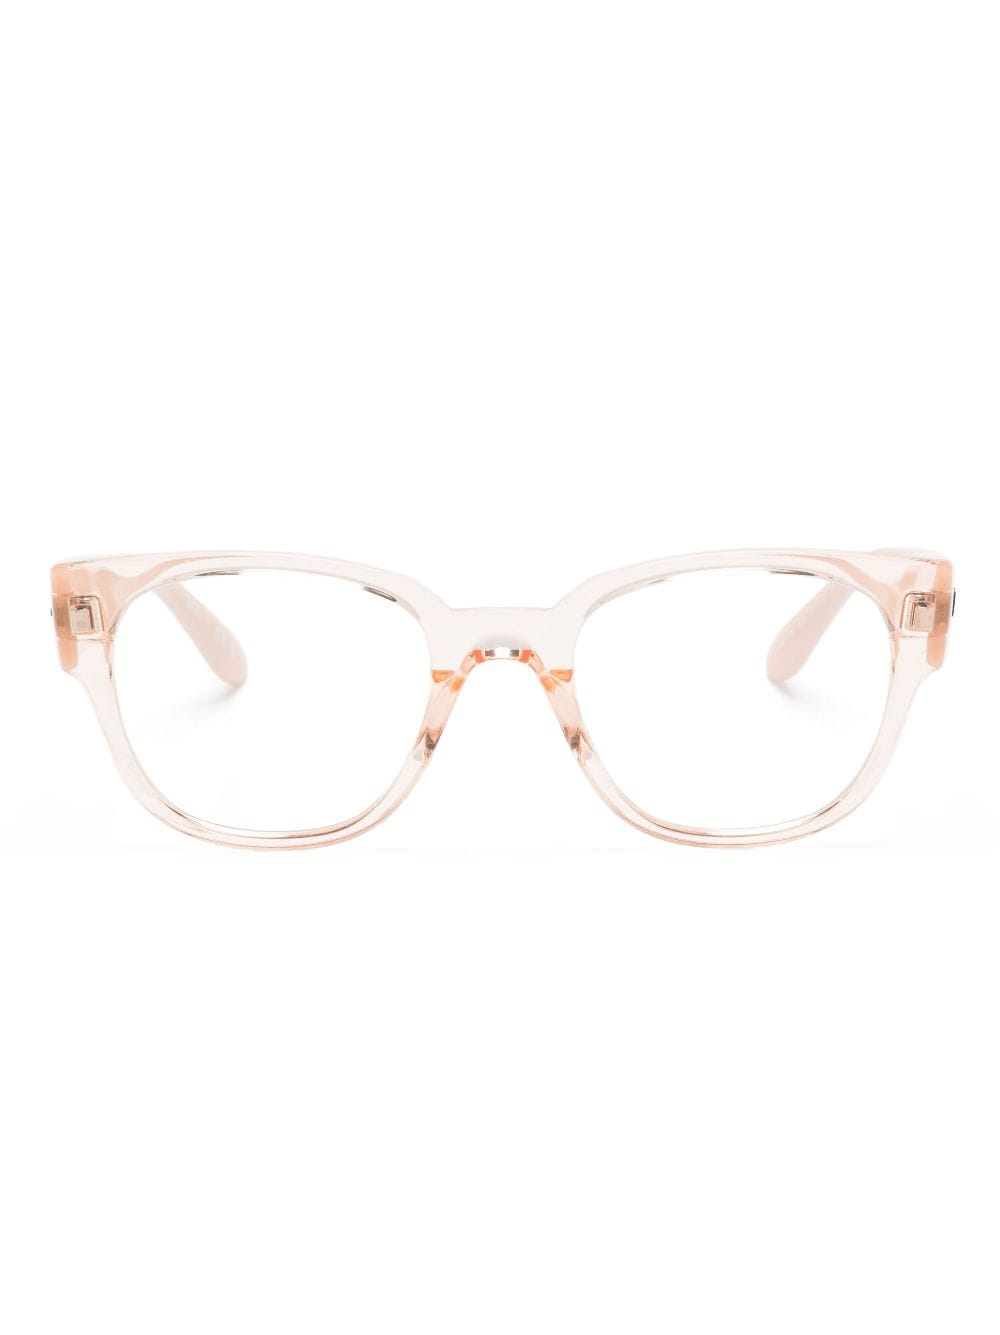 Ray-Ban logo-plaque glasses - Pink von Ray-Ban